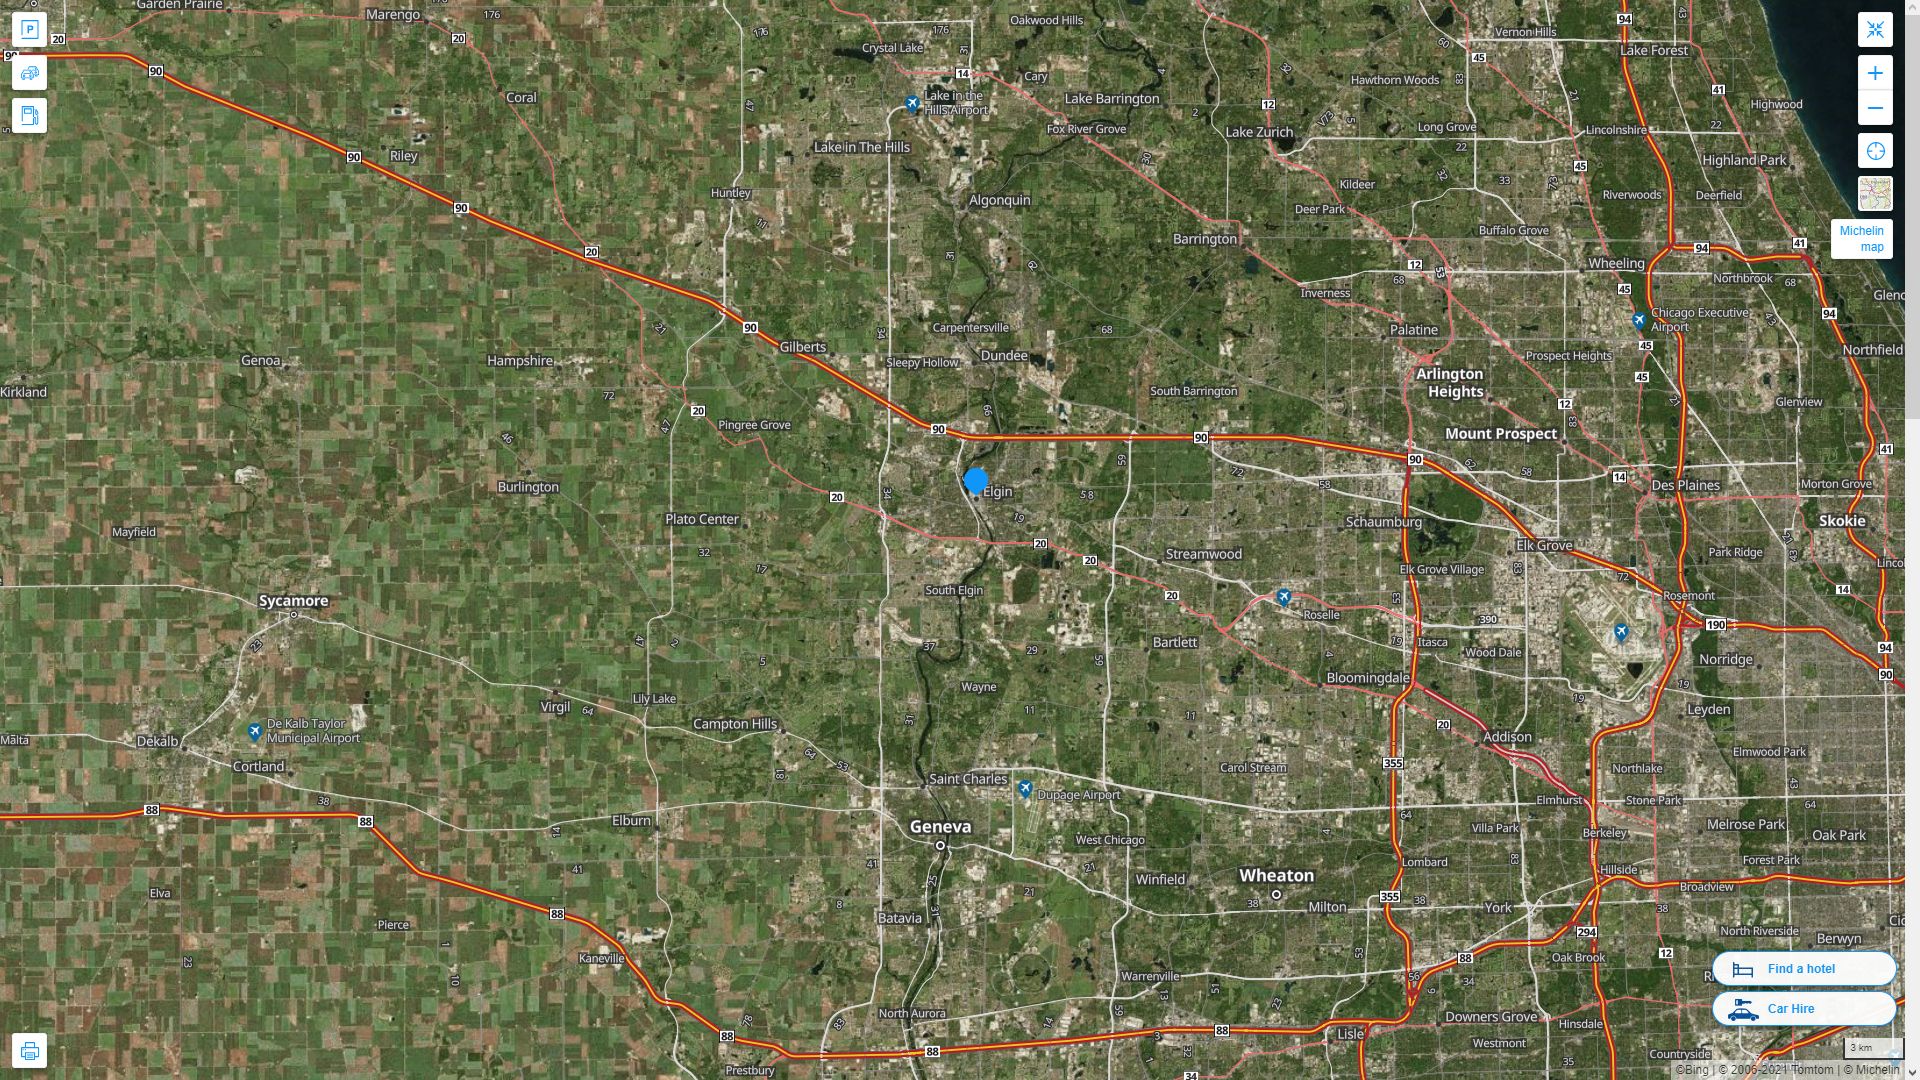 Elgin illinois Highway and Road Map with Satellite View